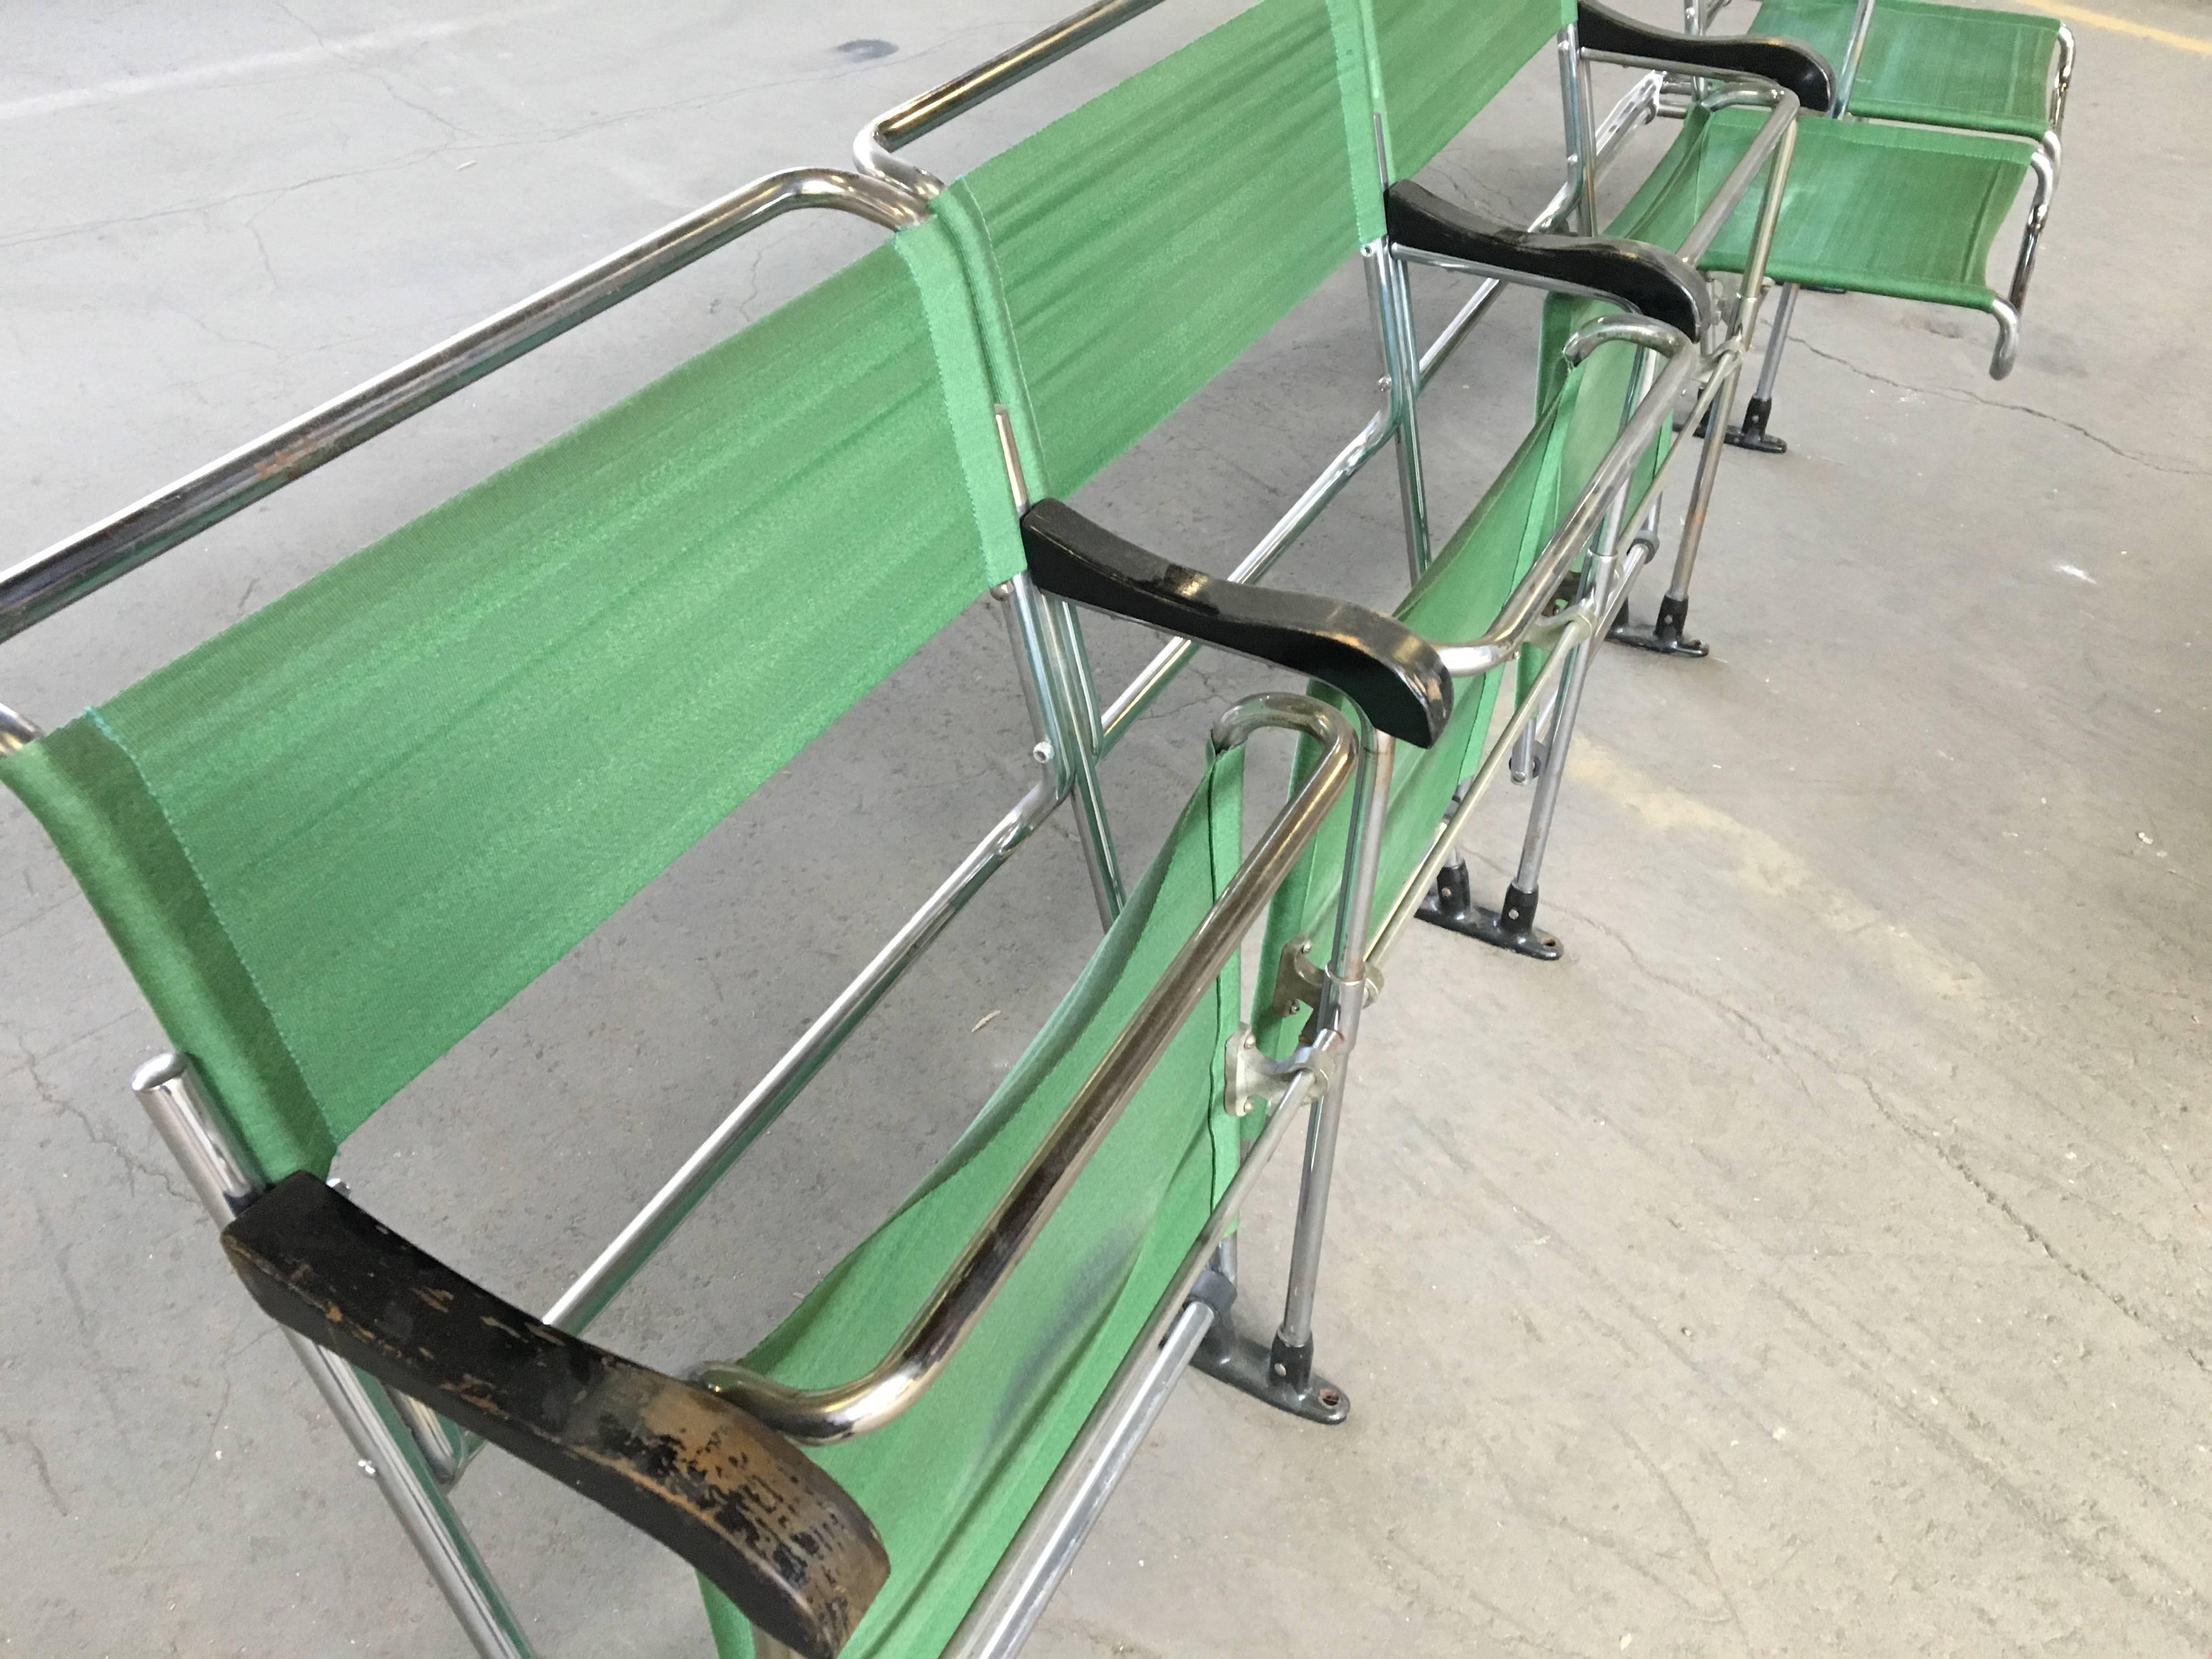 Mid-Century Modern Rare Thonet Marcel Breuer Theater Chairs from the Andy Warhol Museum For Sale